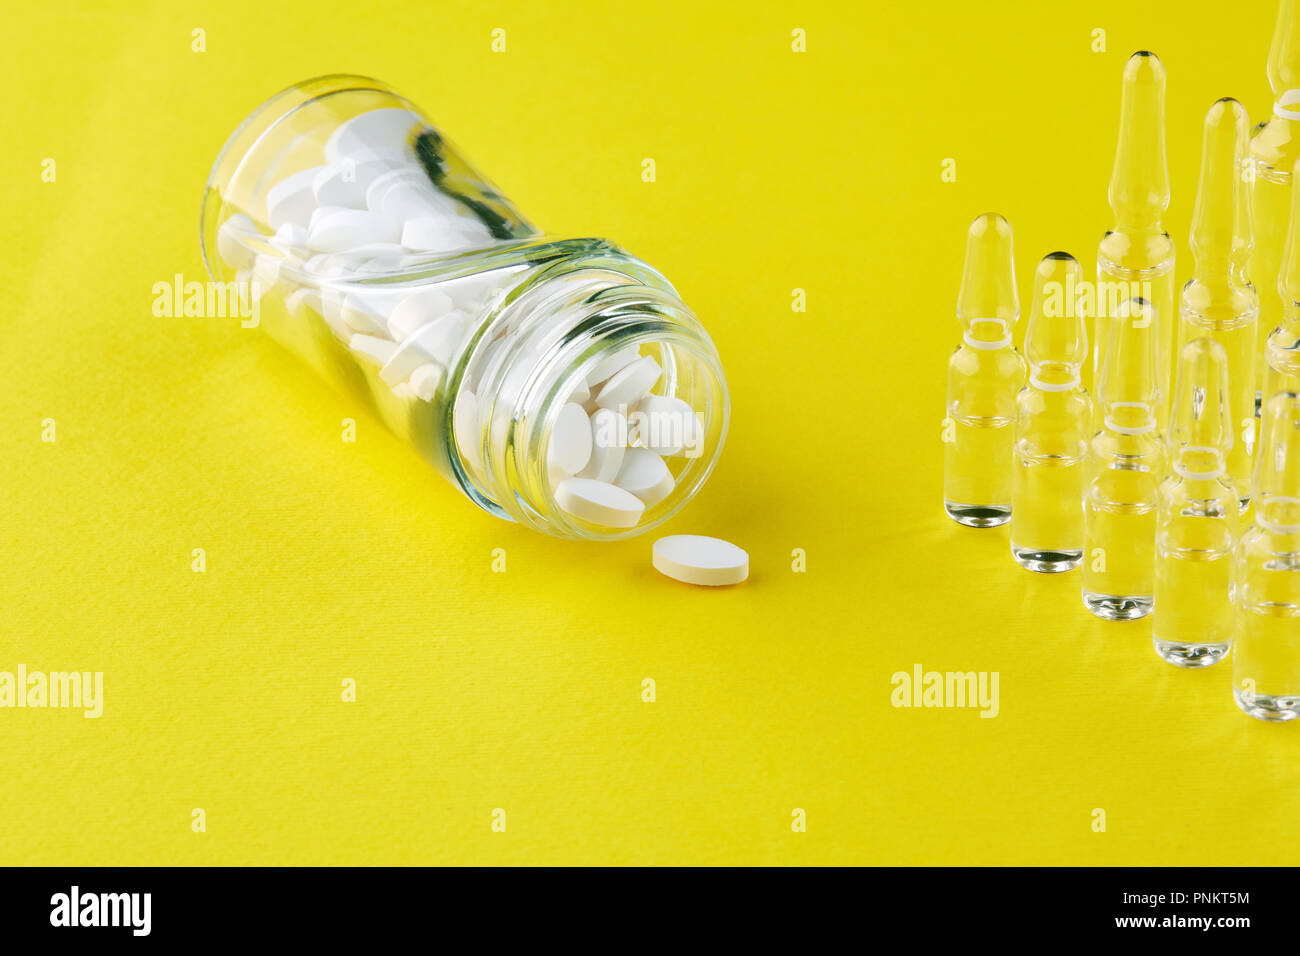 Download Bottle With Tablets And Ampoules On Yellow Background Stock Photo Alamy Yellowimages Mockups